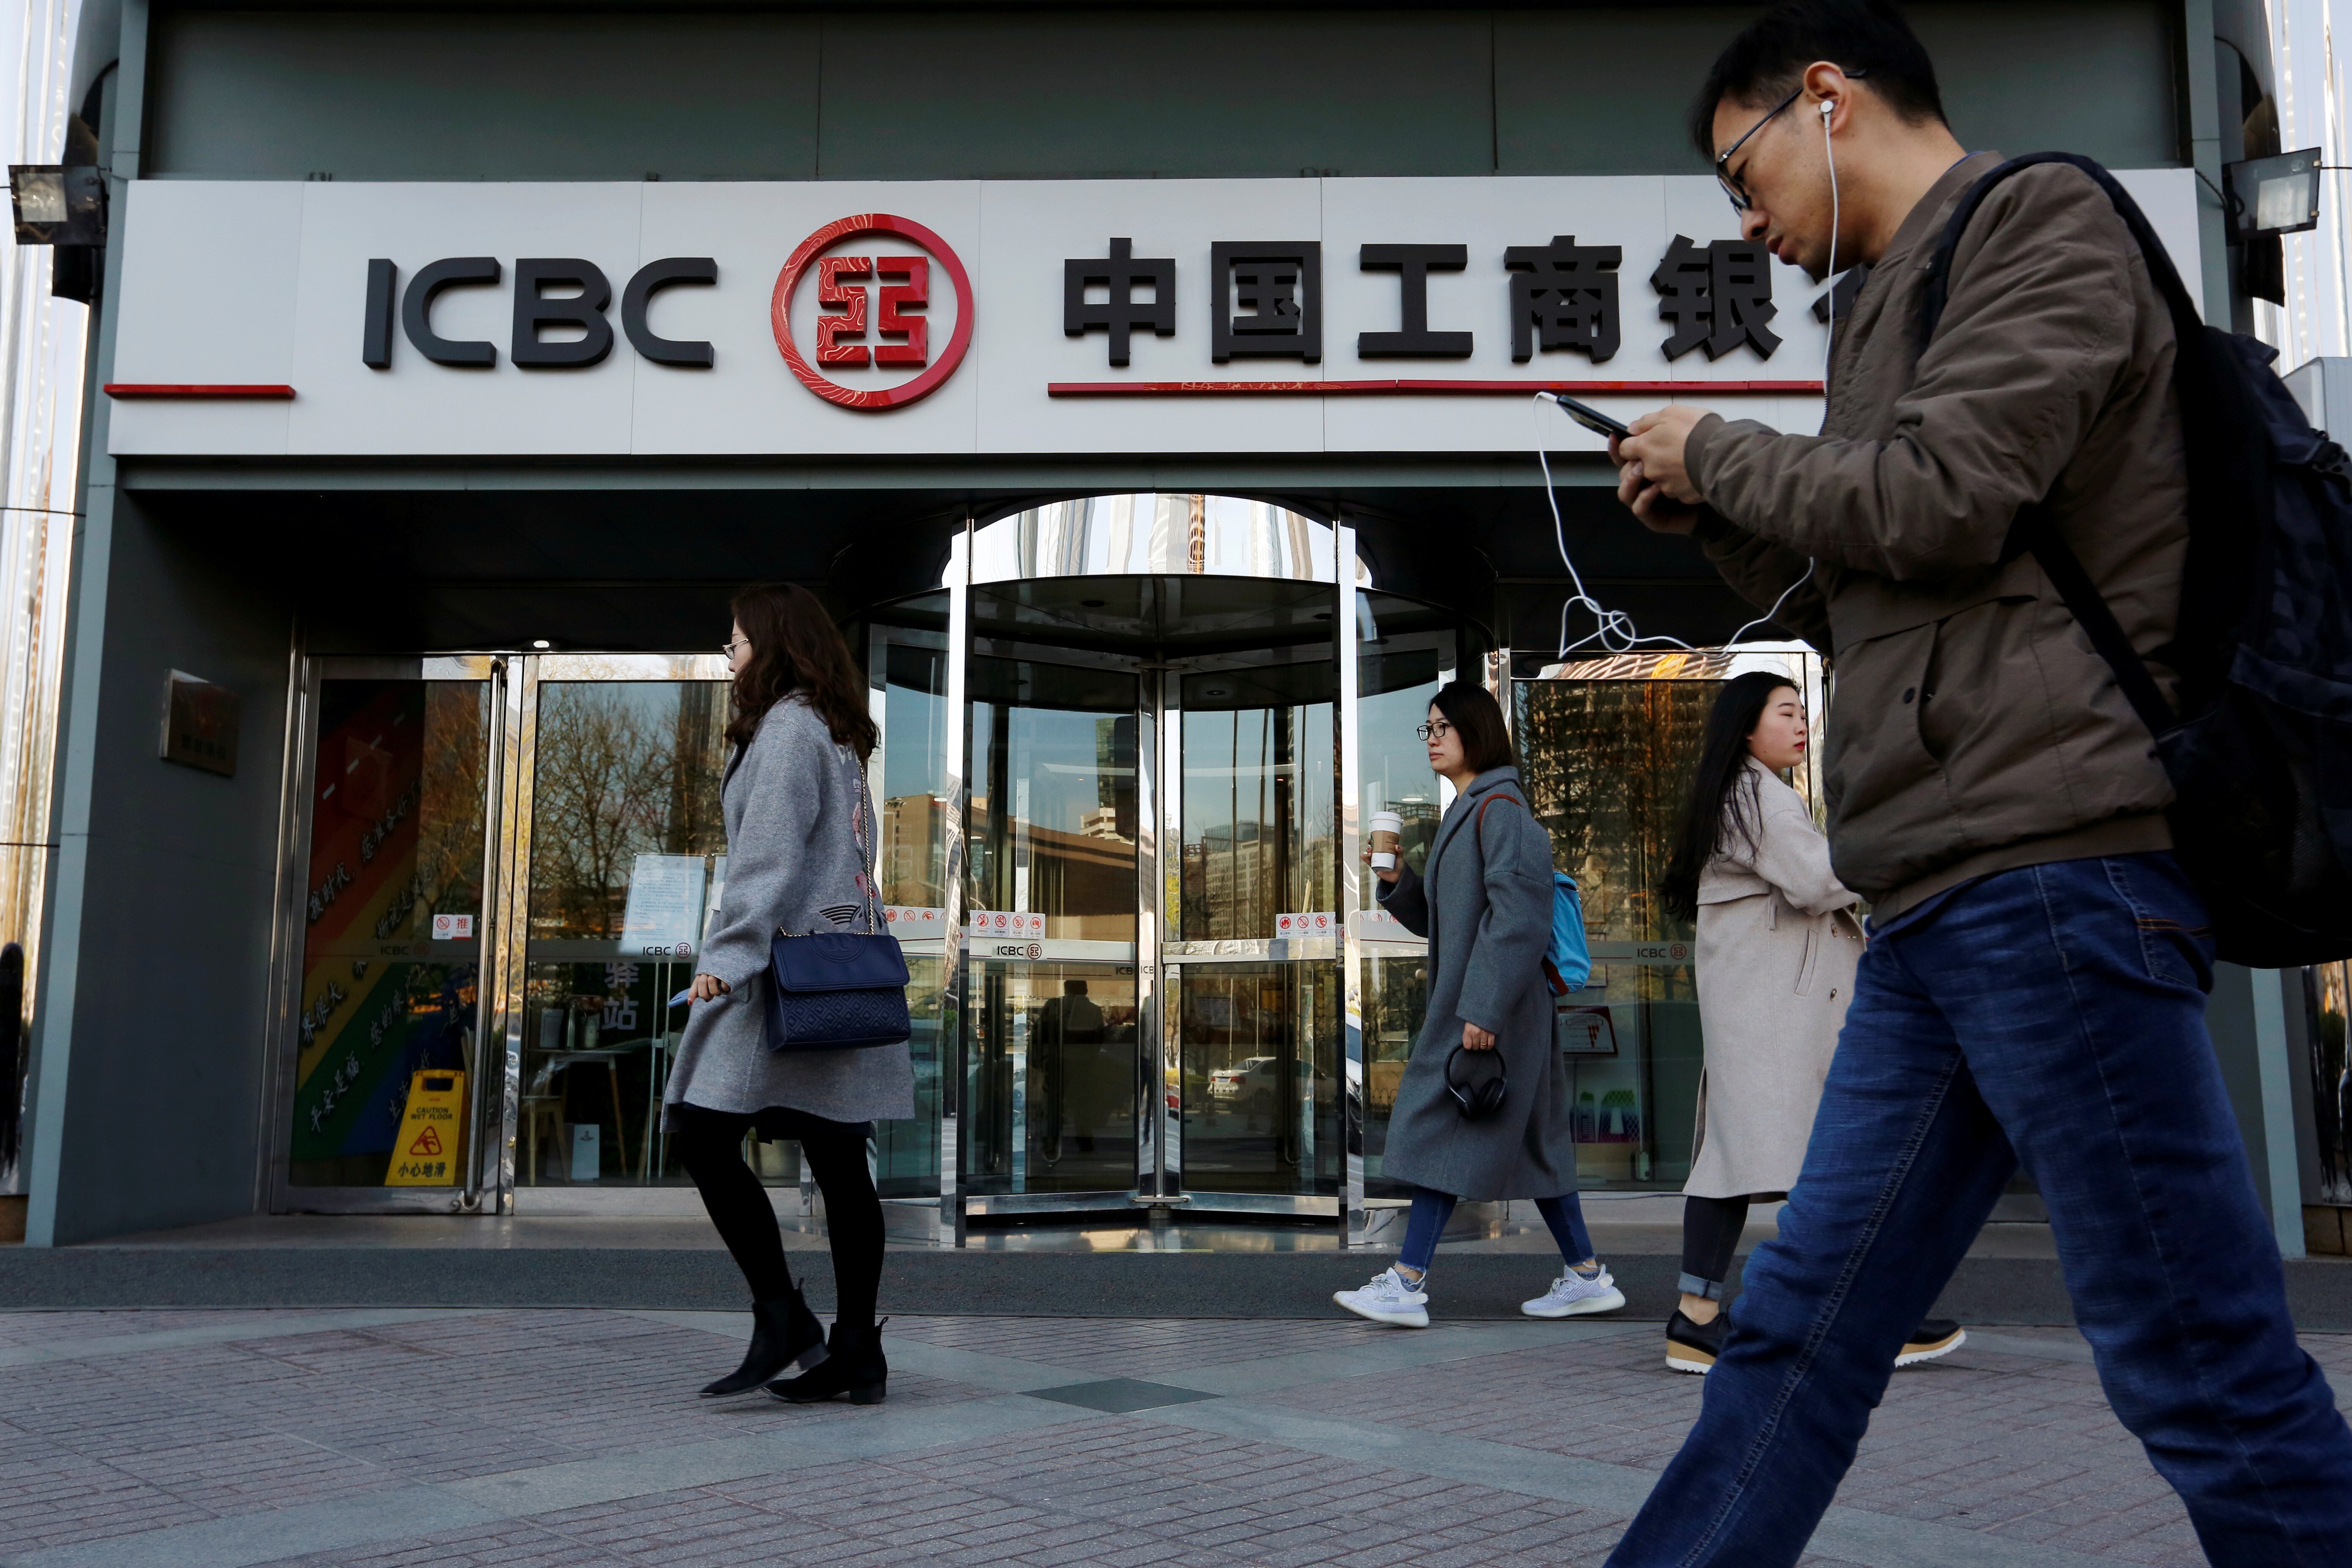 Chinese banks had a record high of 3.02 trillion yuan in non-performing assets in 2020, government data shows. Photo: Reuters